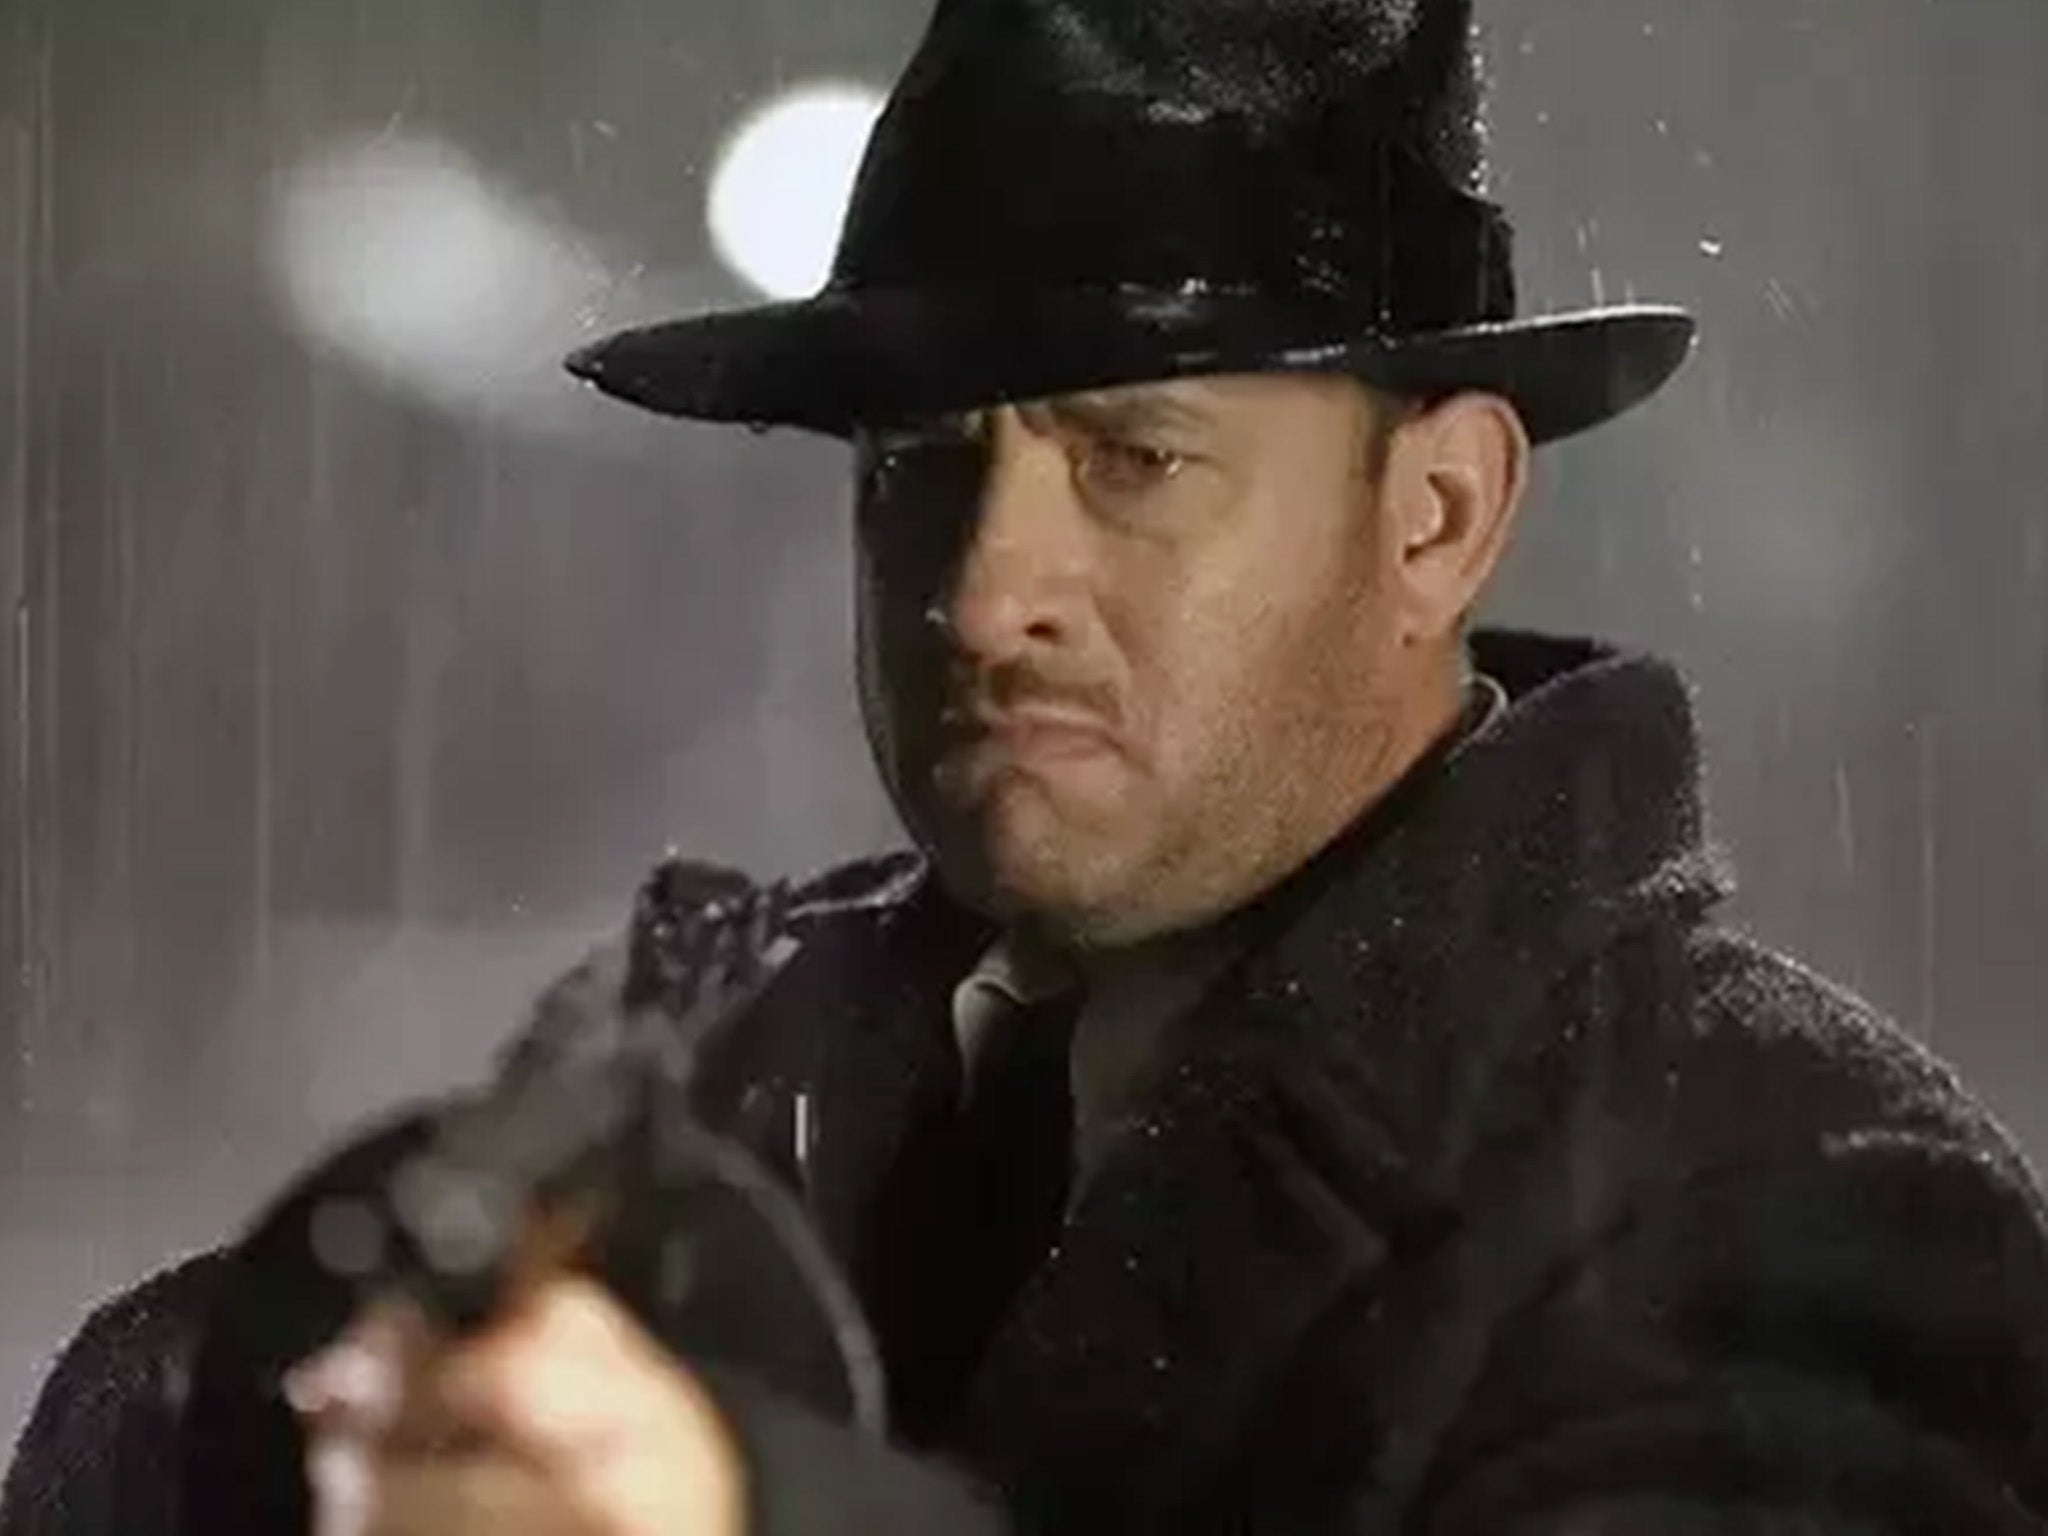 Tom Hanks in Road to Perdition